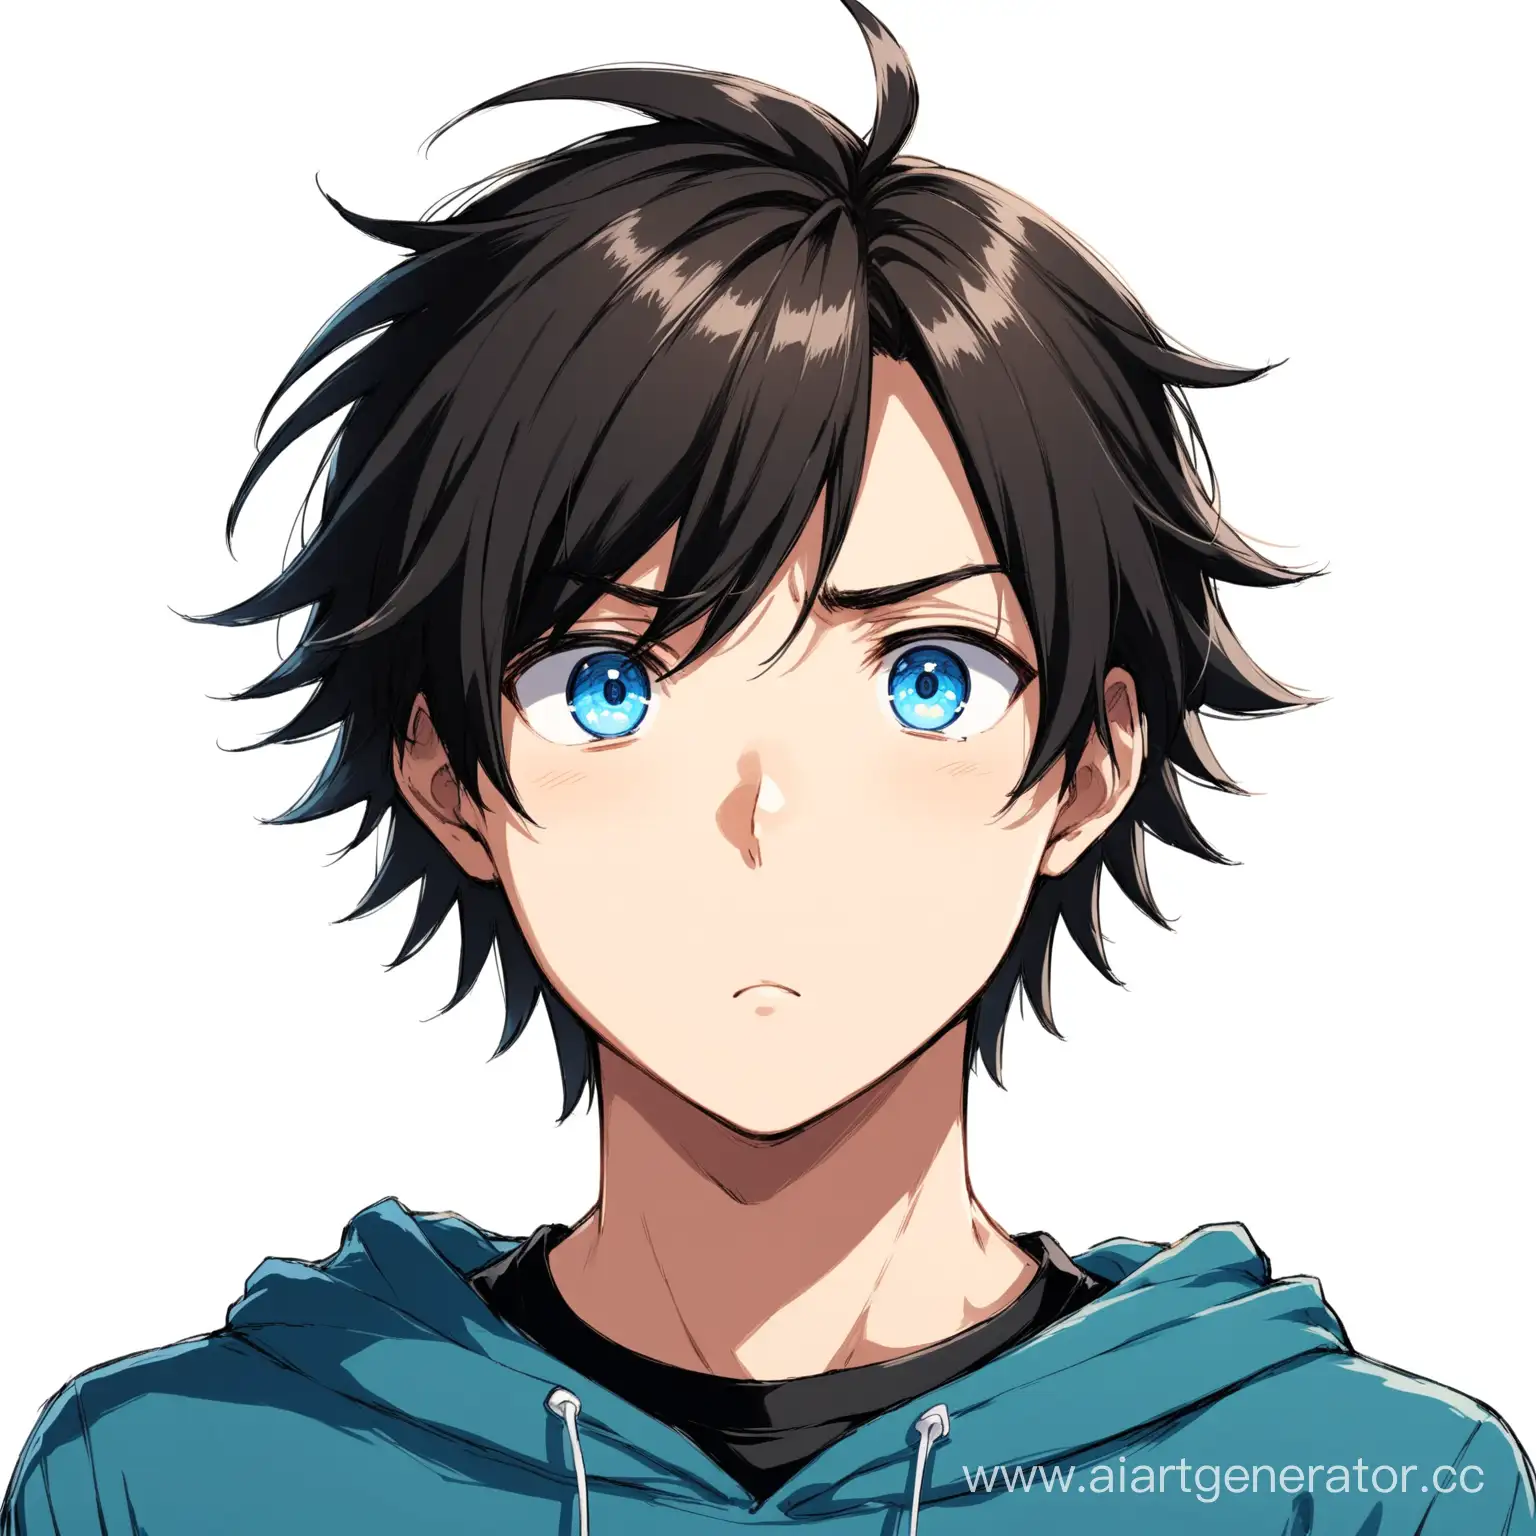 Anime-Guy-in-Black-TShirt-and-Blue-Hoodie-with-Pleasantly-Surprised-Expression